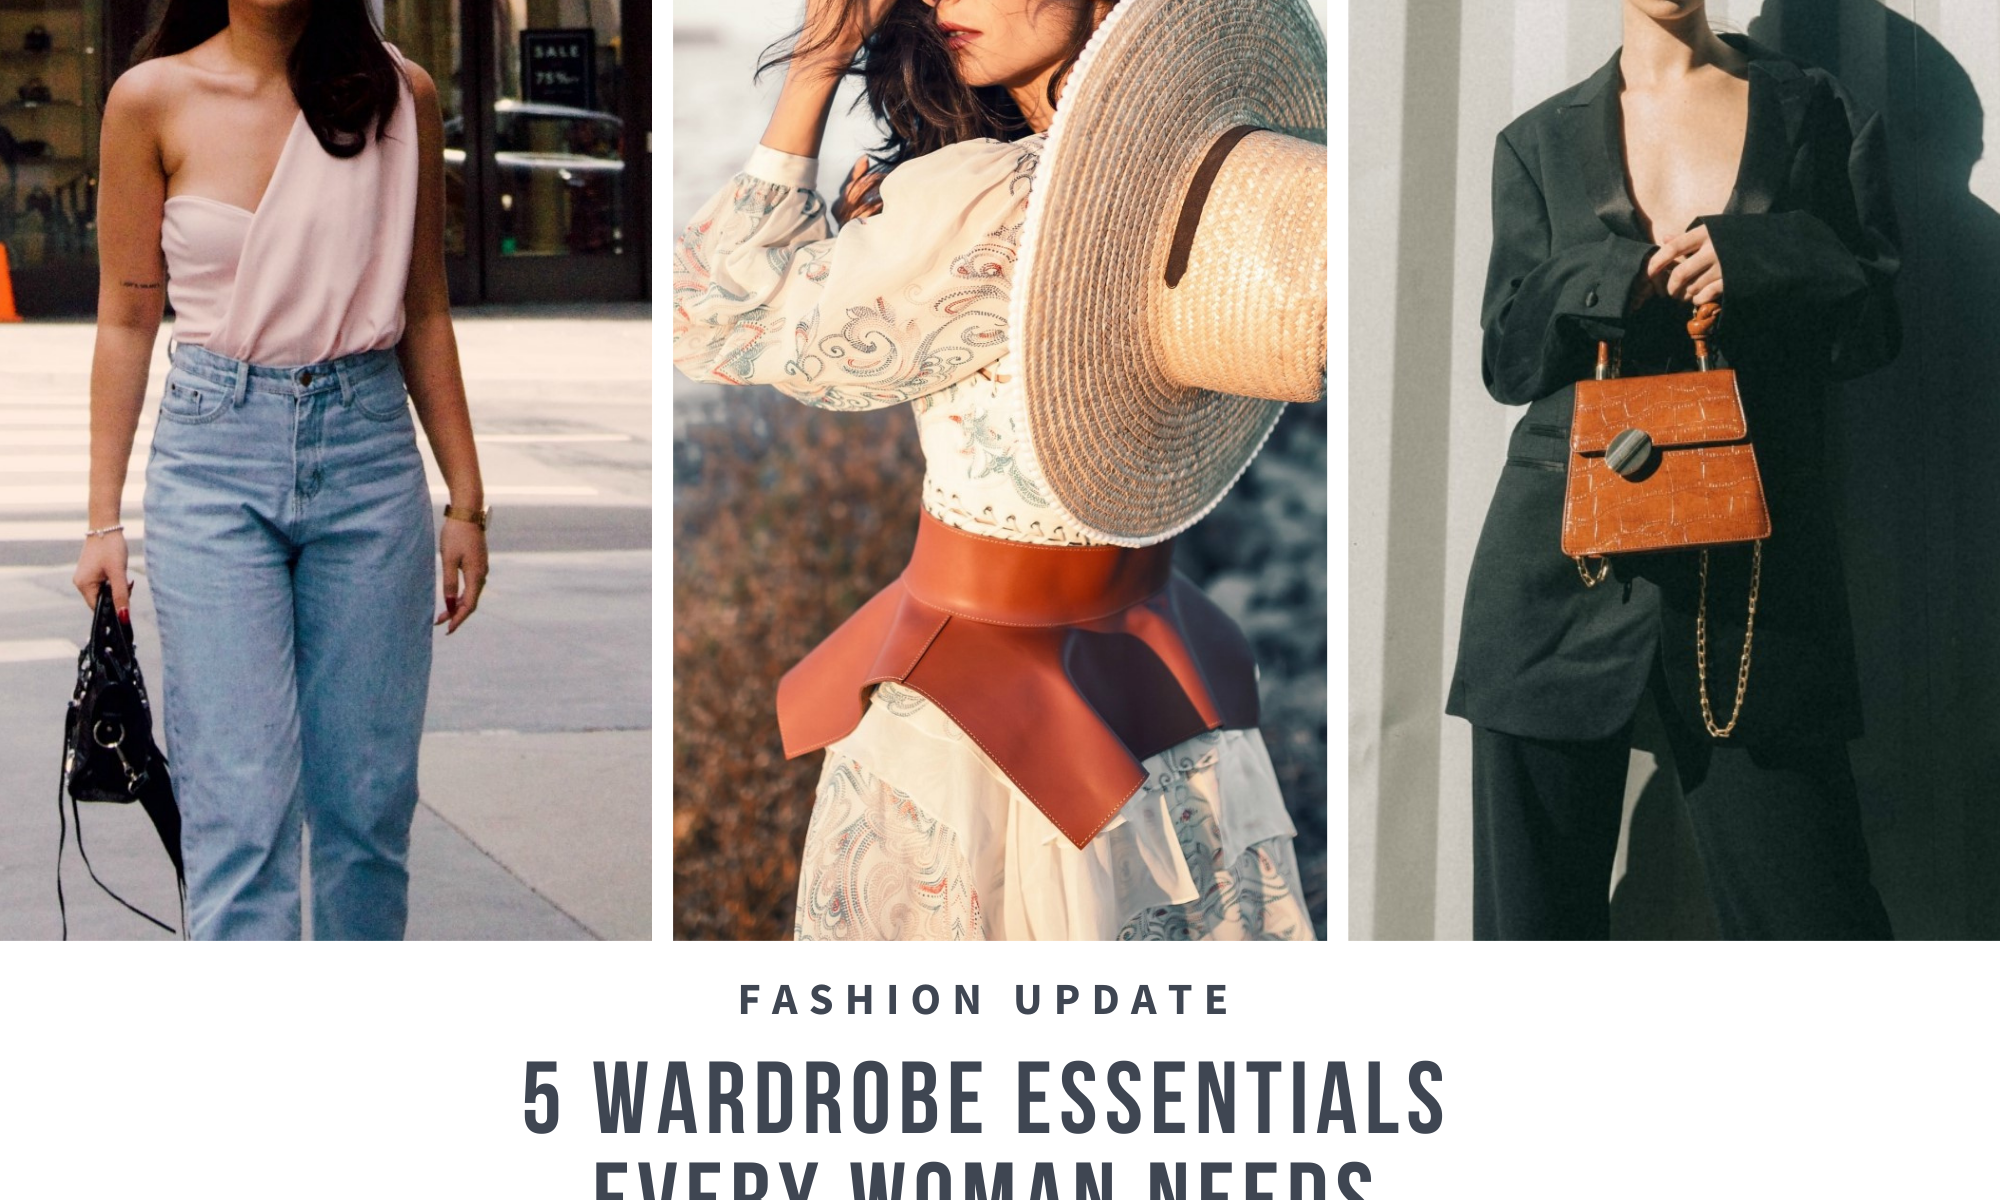 5-Wardrobe-Essentials-Every-Woman-Needs-to-Transition-from-Summer-to-Fall